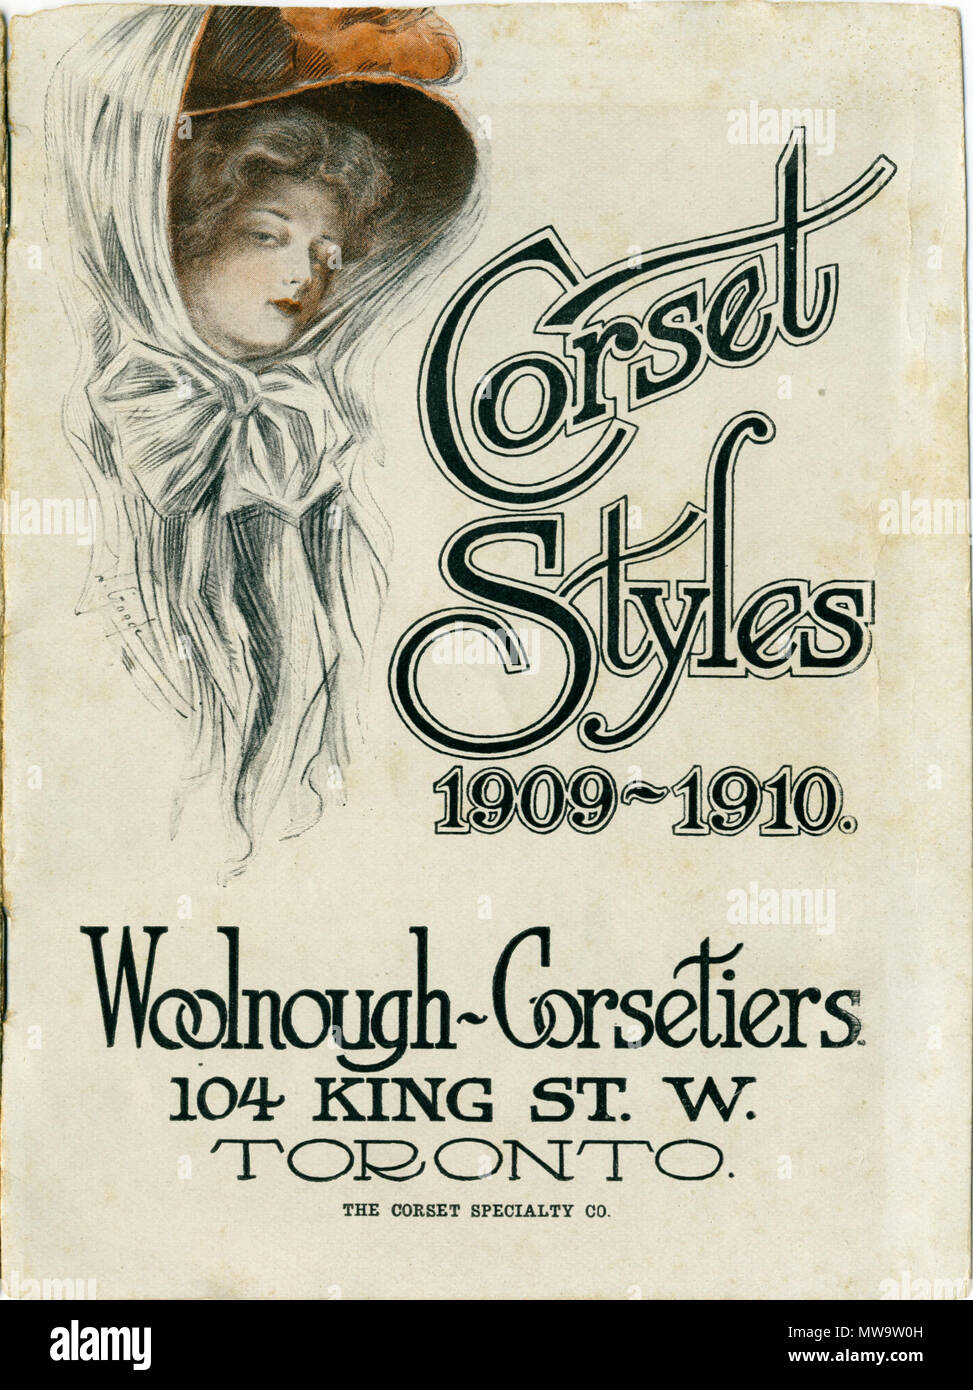 . English: Corset Styles 19091910. WoolnoughCorsetiers. 104 KING ST. W. TORONTO THE CORSET SPECIALTY CO. 1909. Signature W Gande ? Woolnough-Corsetiers 144 CorsetStyles1909-1910 Stock Photo